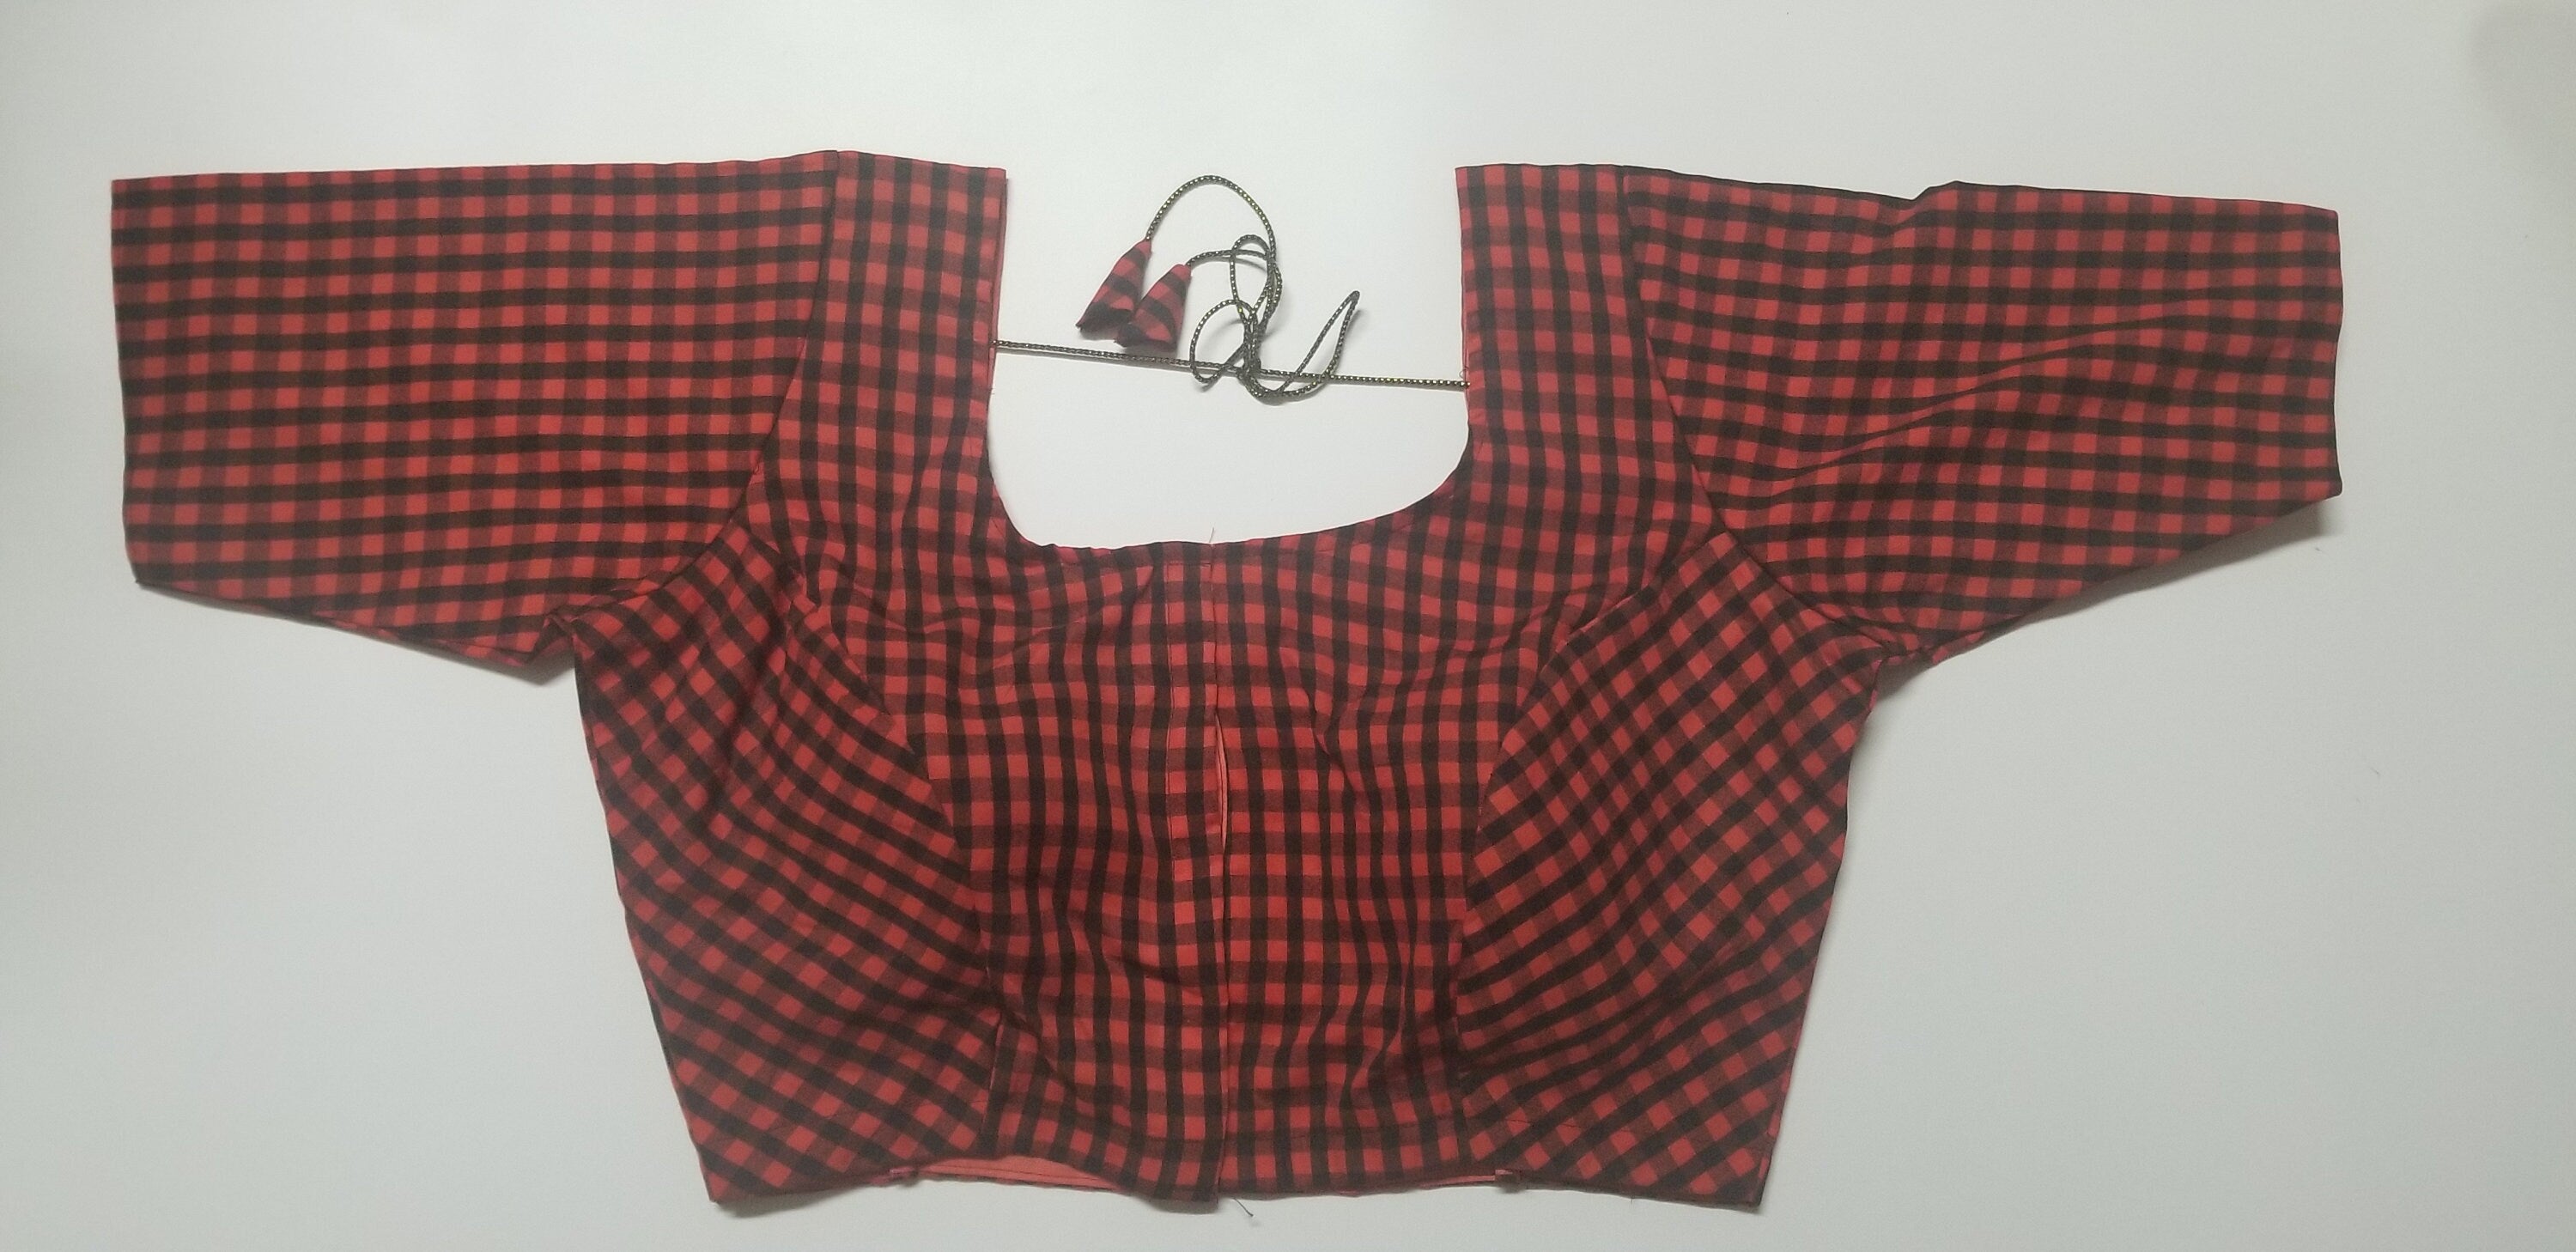 Readymade Saree Blouse - Red with Black checked Blouse - Plus size - Princess cut padded - size 42" (alter 38" to 46")